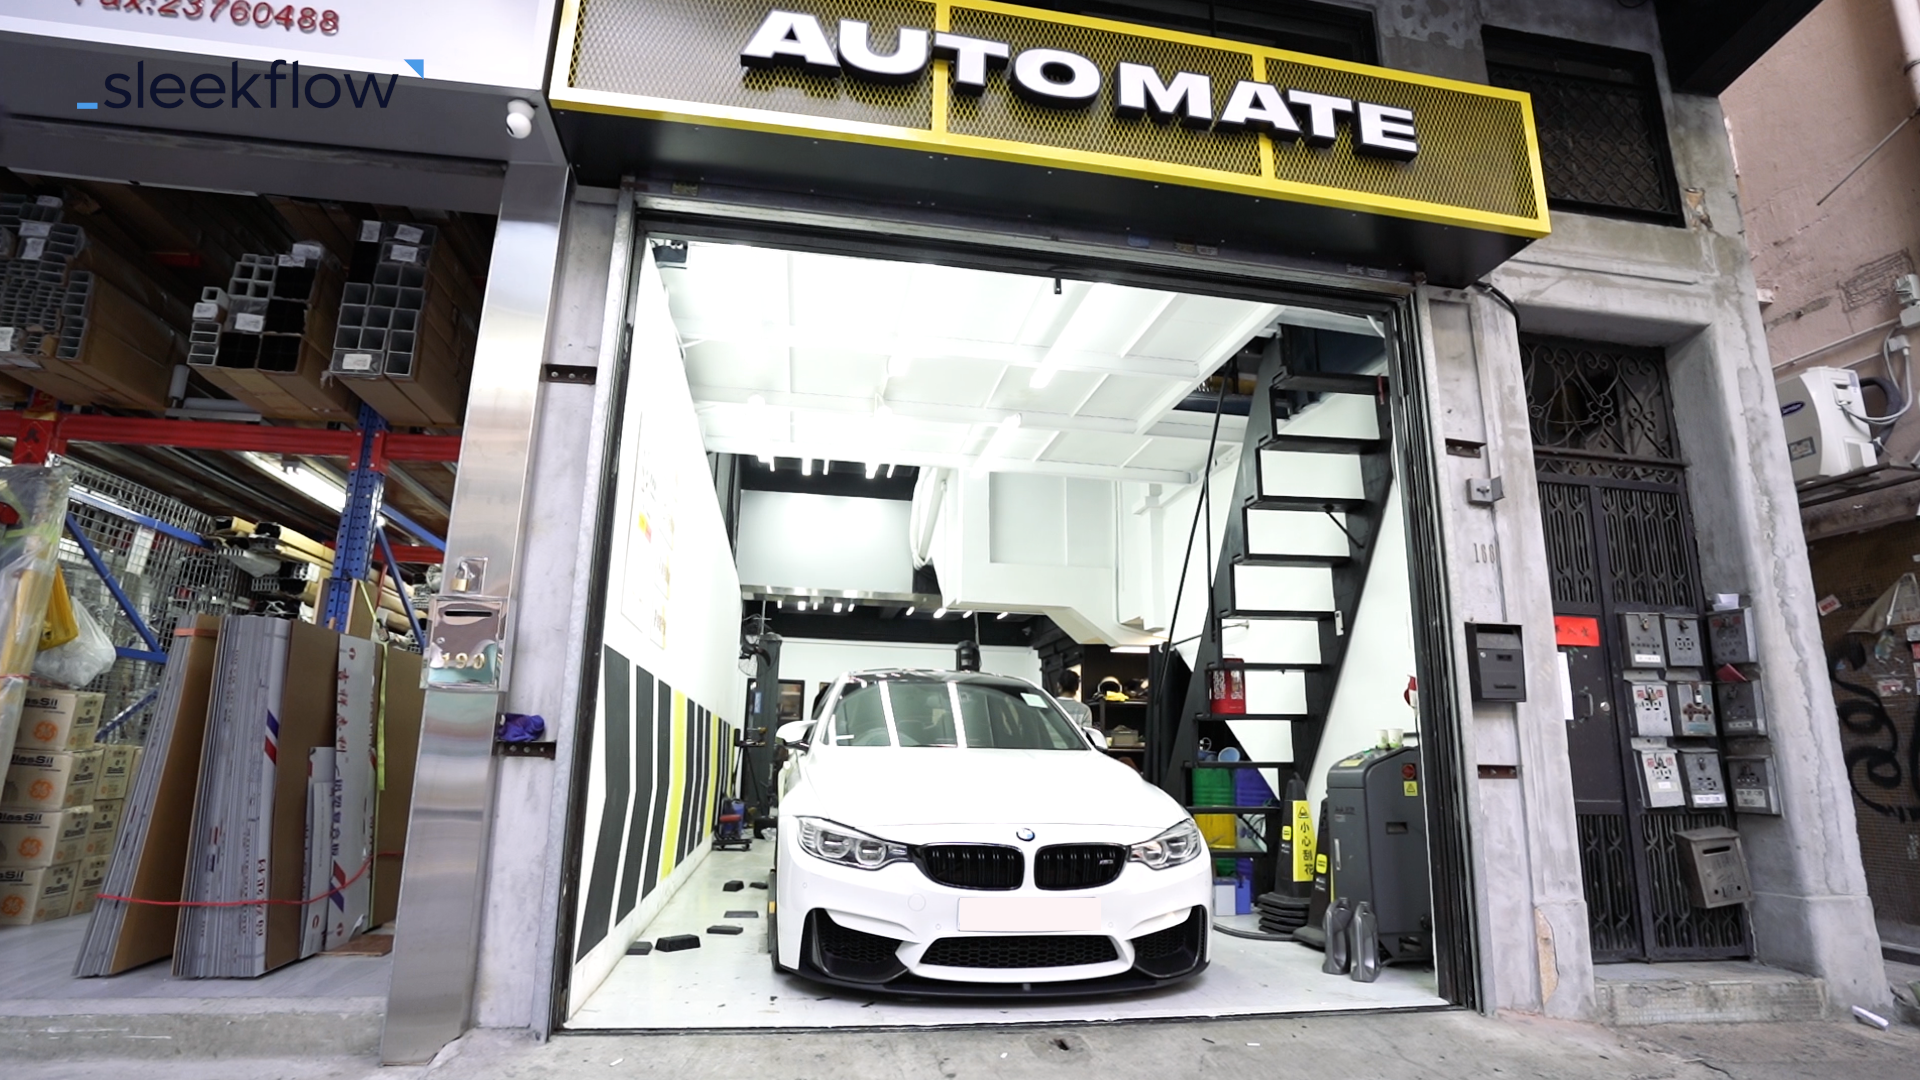 How AutoMate, a car service platform, uses SleekFlow to achieve 5 times higher conversion rates